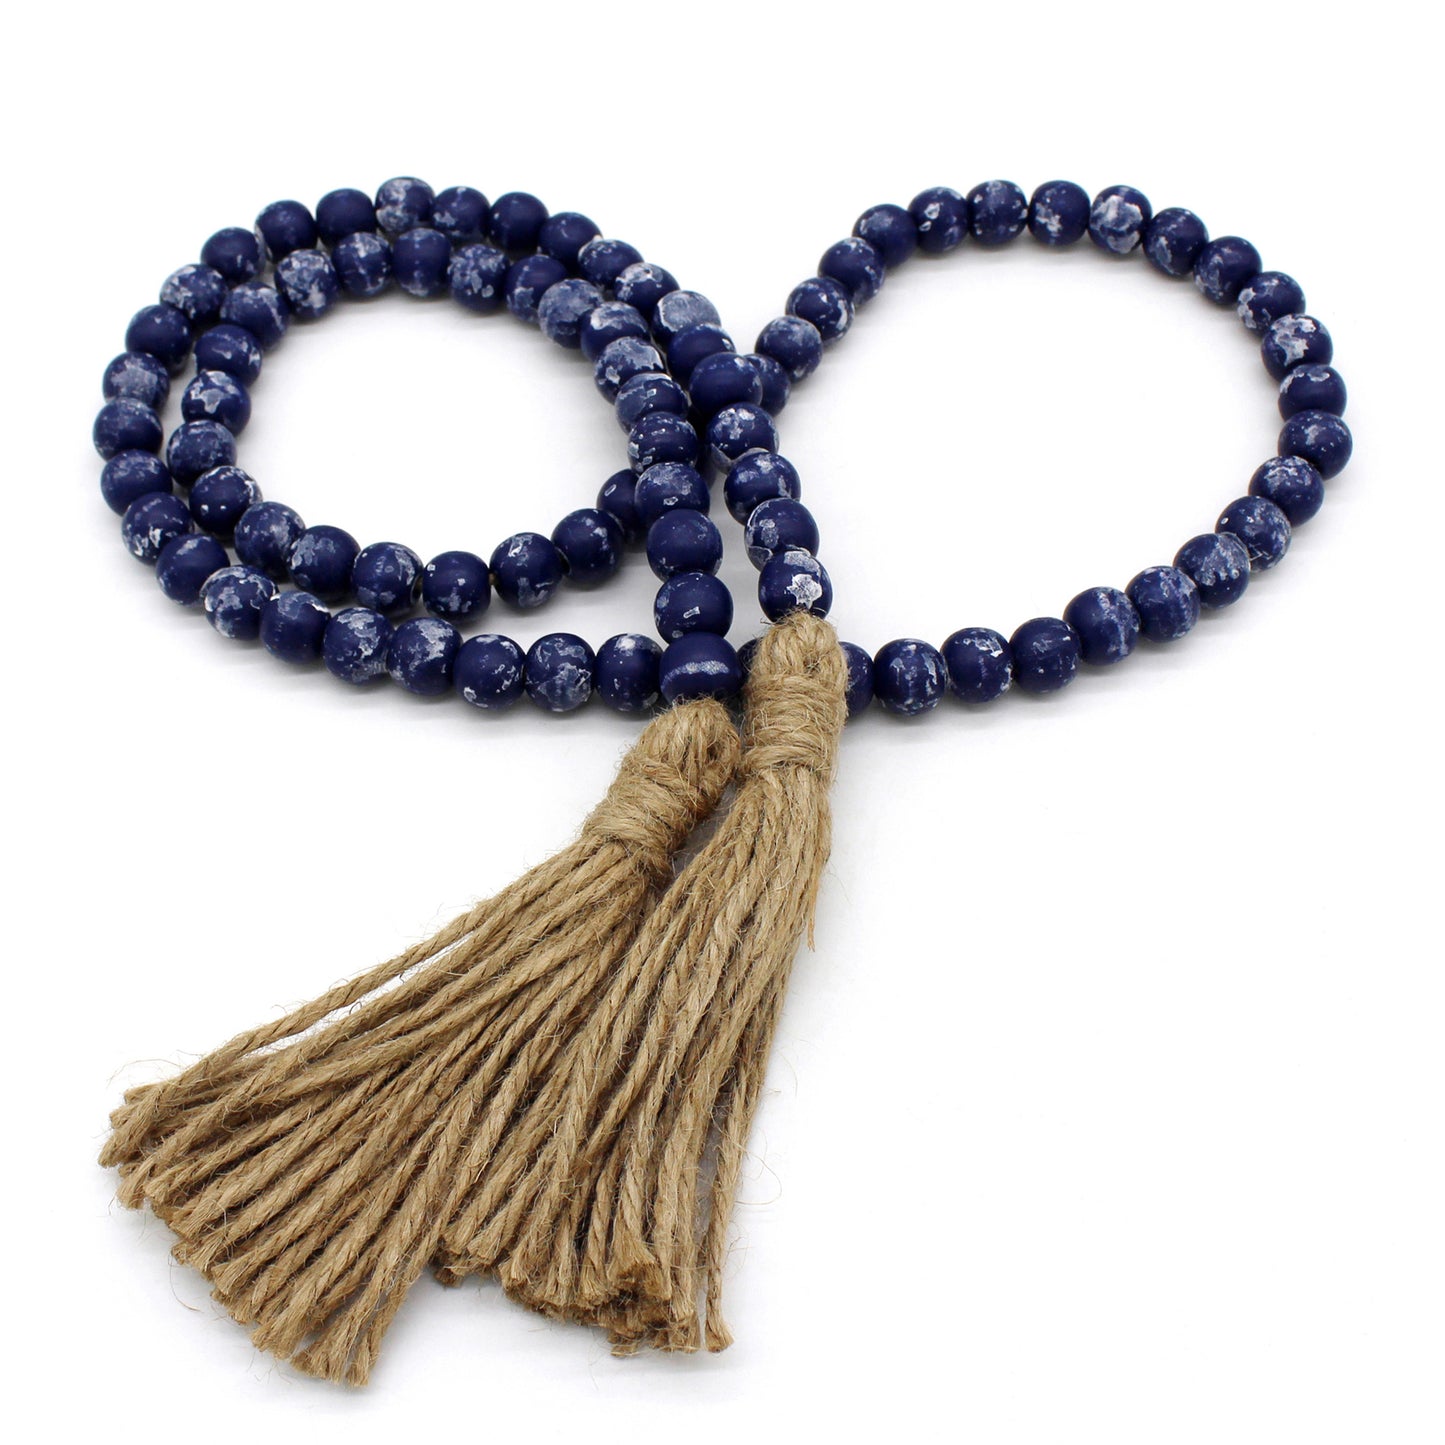 CVHOMEDECO. Wood Beads Garland with Tassels Farmhouse Rustic Wooden Prayer Bead String Wall Hanging Accent for Home Festival Decor. Navy Blue Distressed